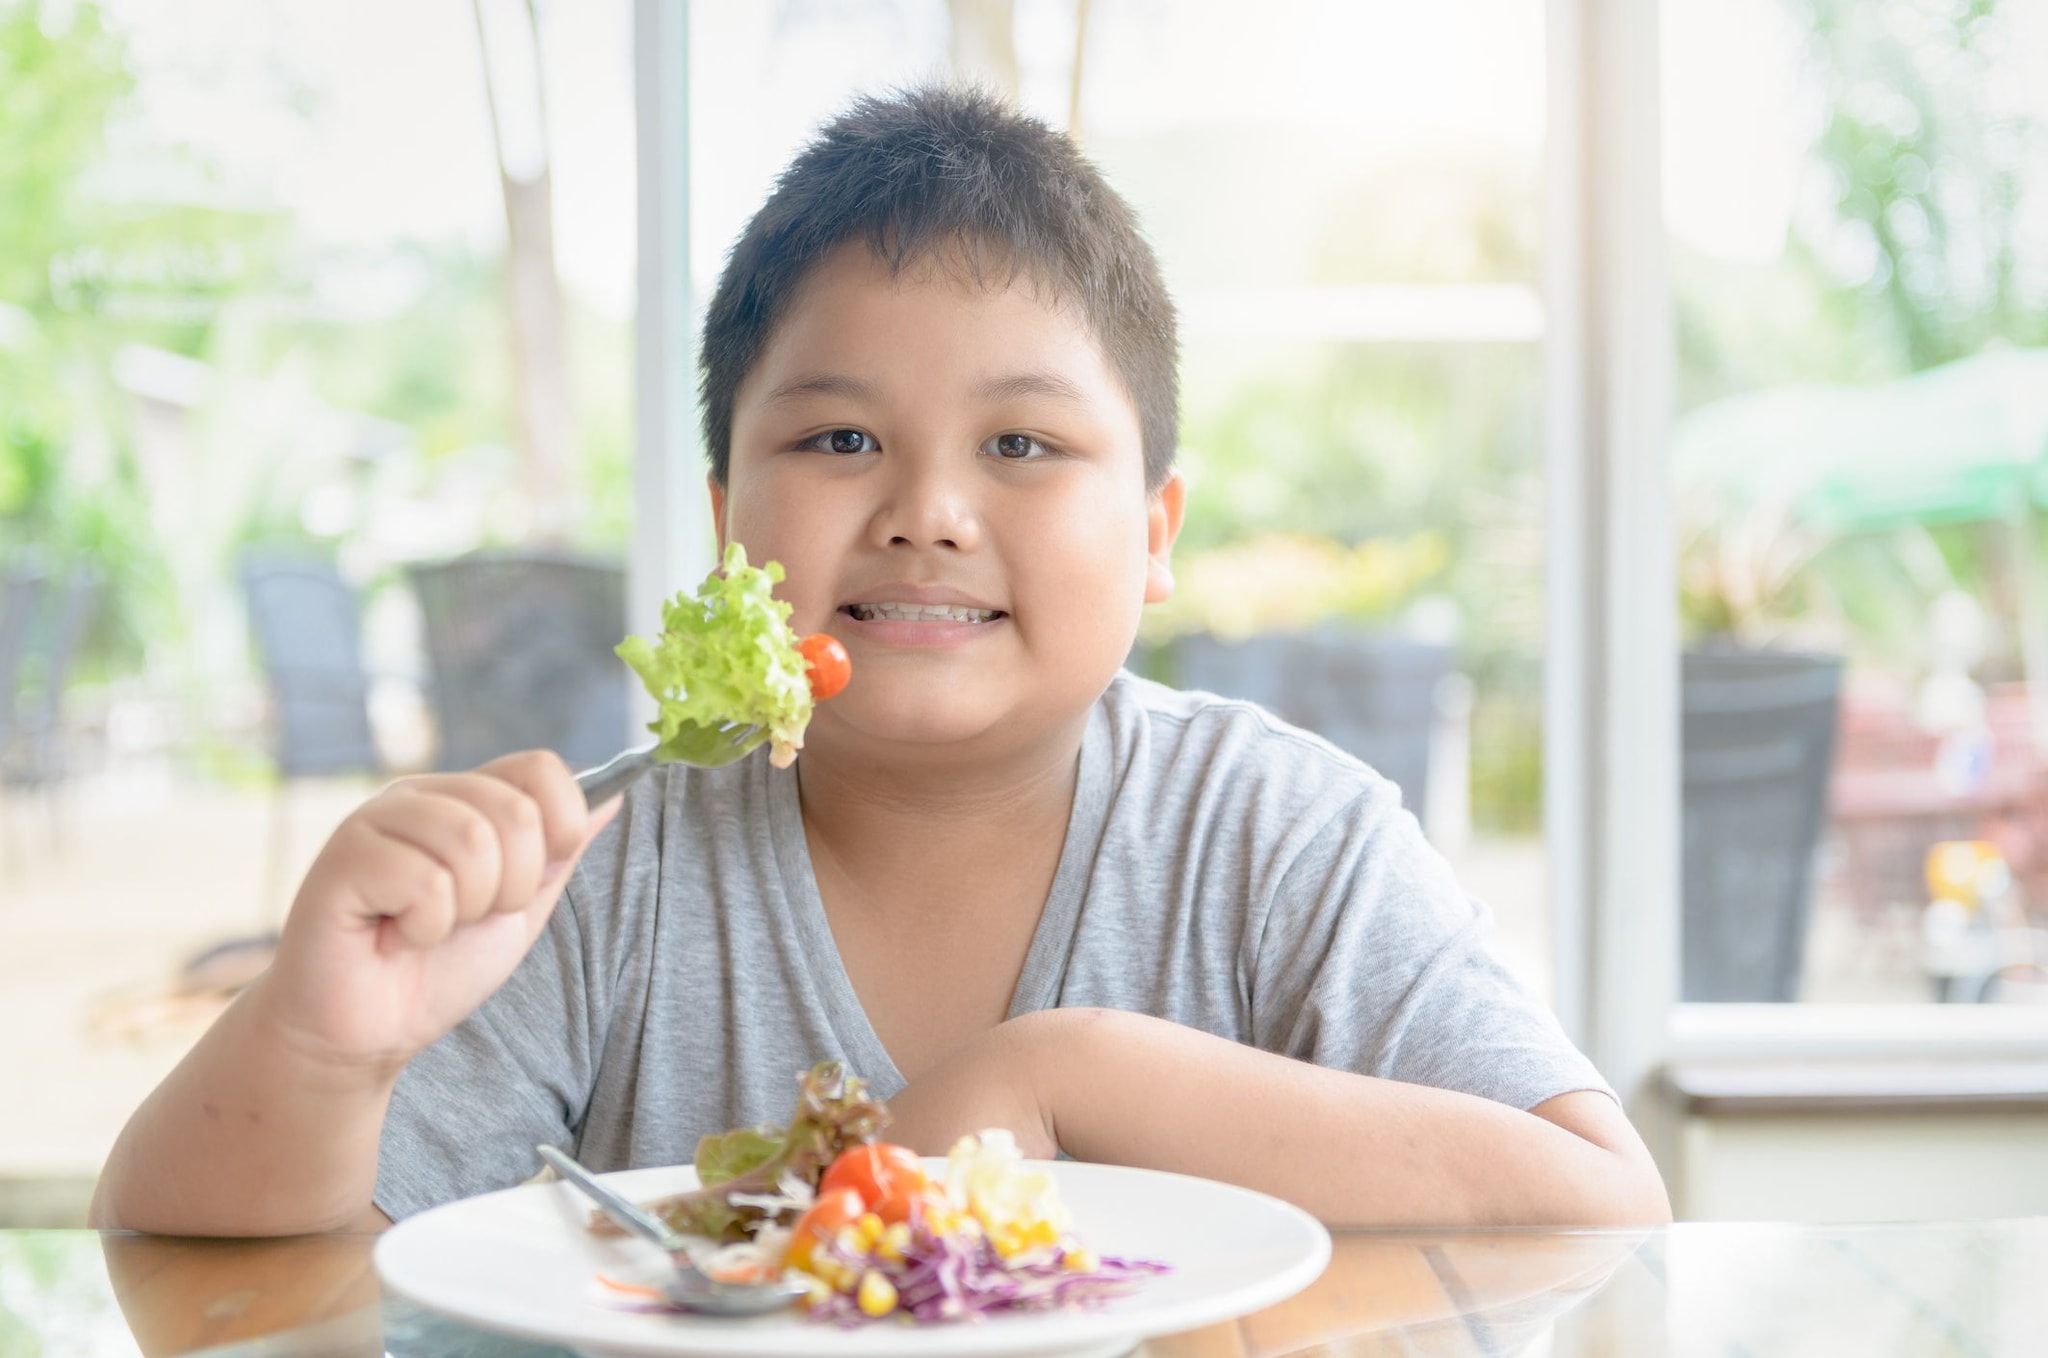 Young boy eating a salad